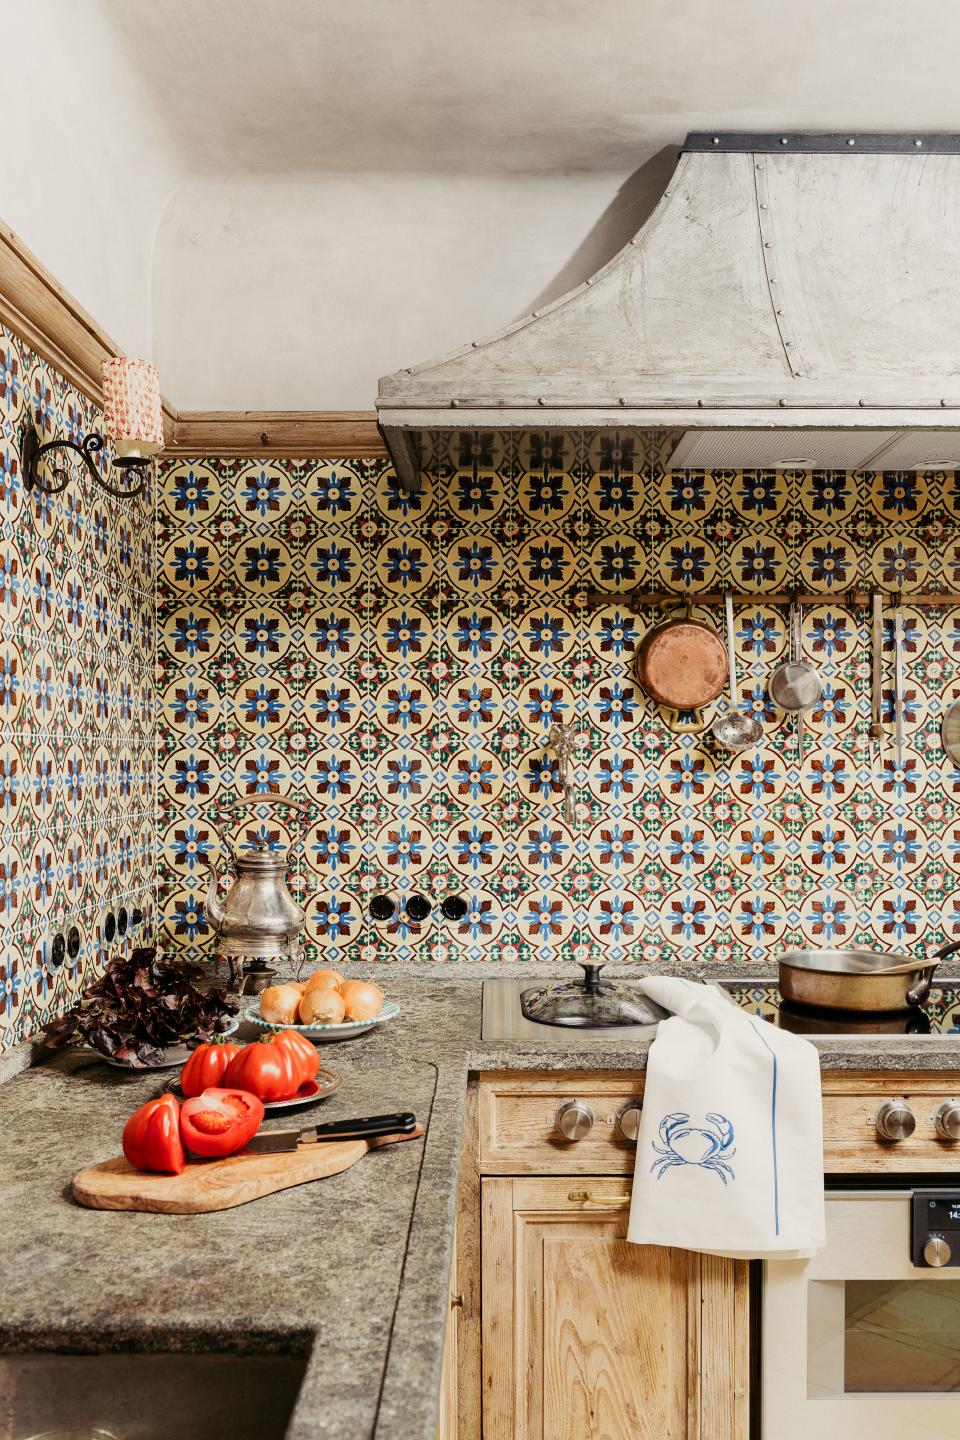 A custom iron hood by Studio Peregalli mixes with Portuguese tiles in the kitchen. Peperino marble countertops; Fir cabinetry.